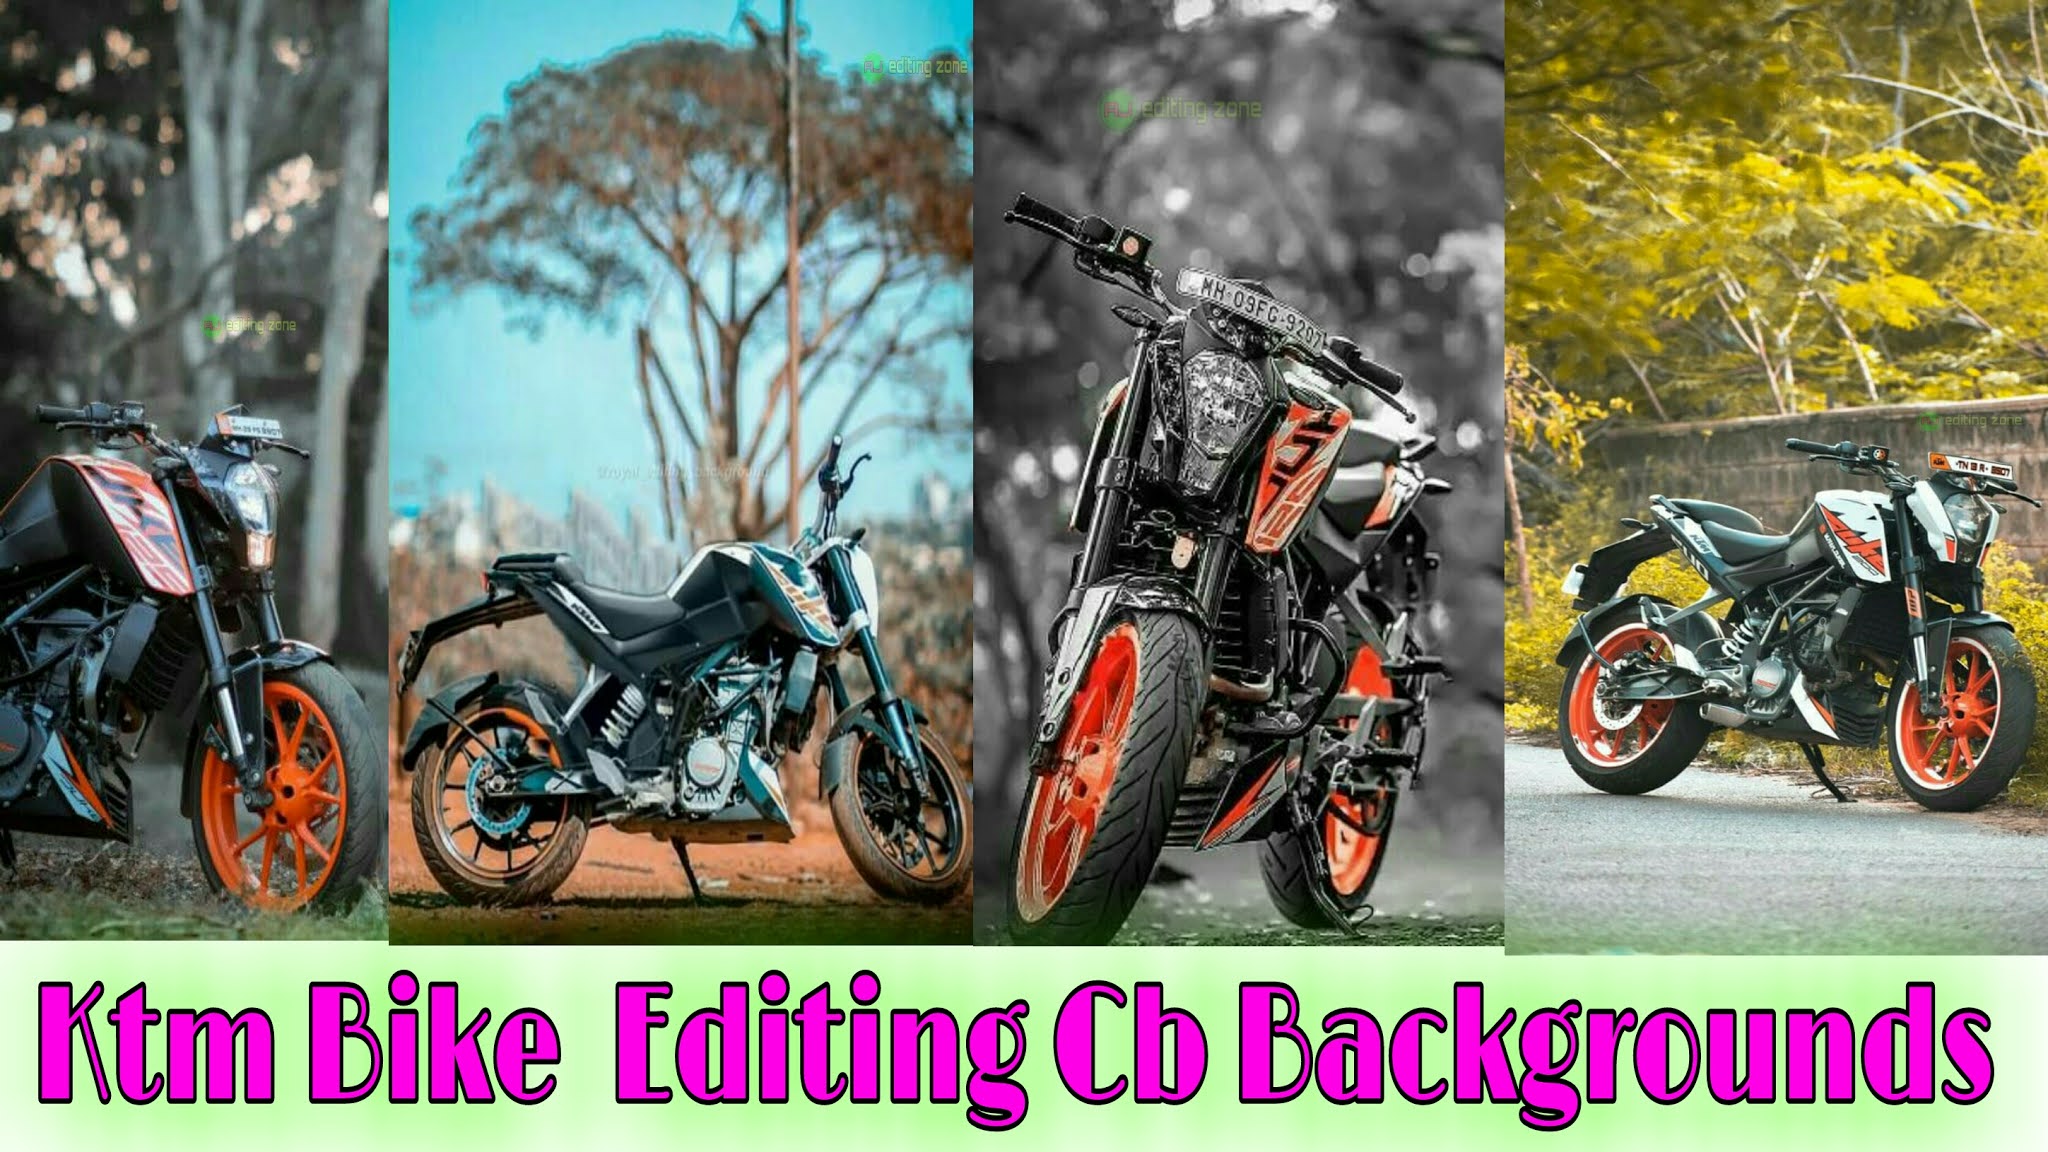 100+Ktm Bike Photo Editing Cb Backgrounds for Boys | Bike Photo Photo Shoot Poses Without Face for Editing 2021